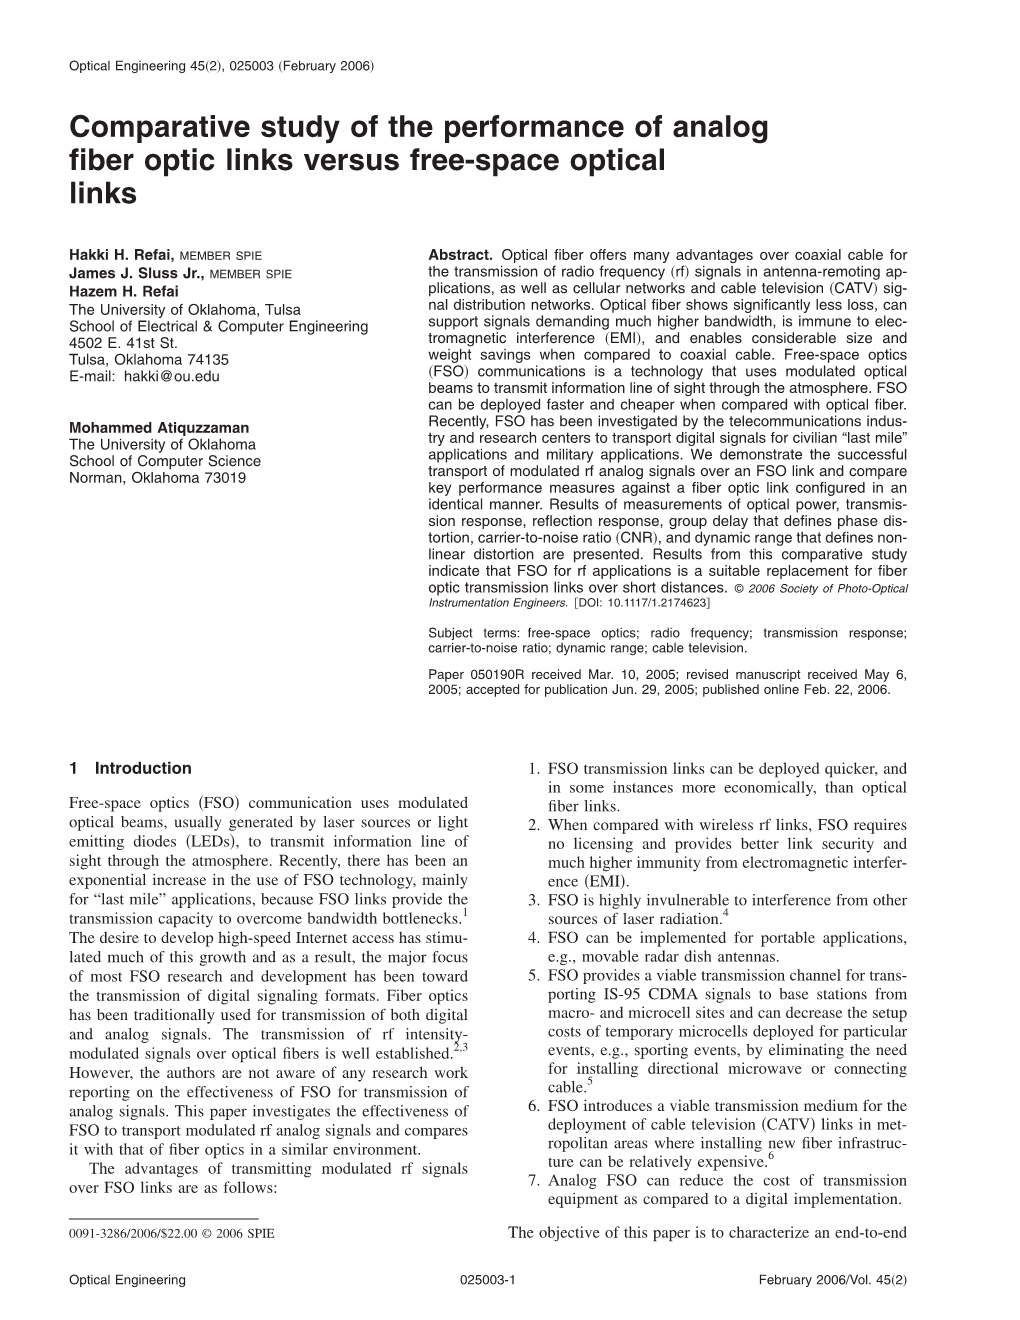 Comparative Study of the Performance of Analog Fiber Optic Links Versus